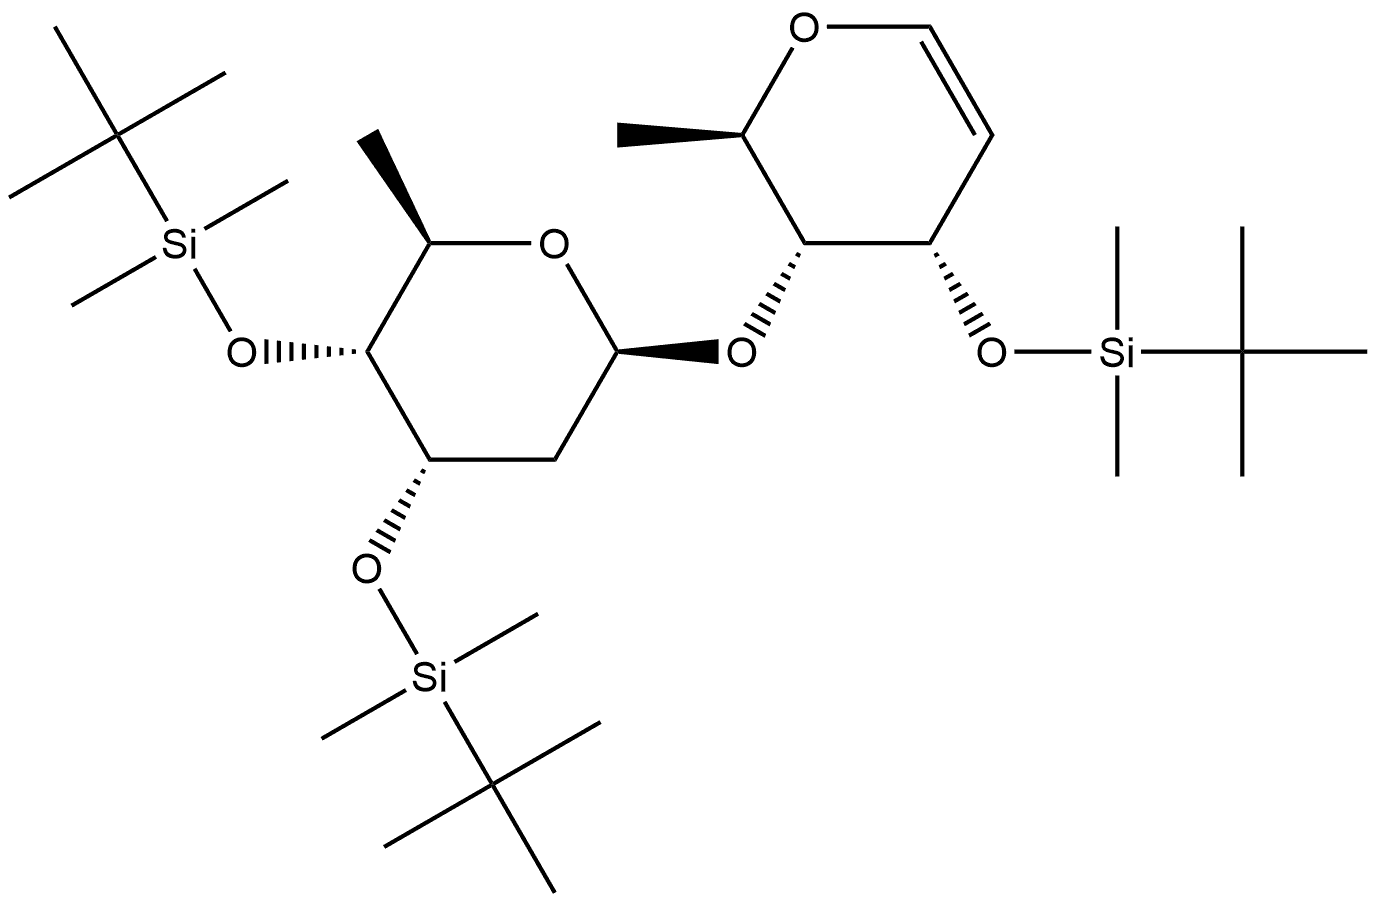 D-ribo-Hex-1-enitol, 1,5-anhydro-2,6-dideoxy-4-O-[2,6-dideoxy-3,4-bis-O-[(1,1-dimethylethyl)dimethylsilyl]-β-D-ribo-hexopyranosyl]-3-O-[(1,1-dimethylethyl)dimethylsilyl]- Structure